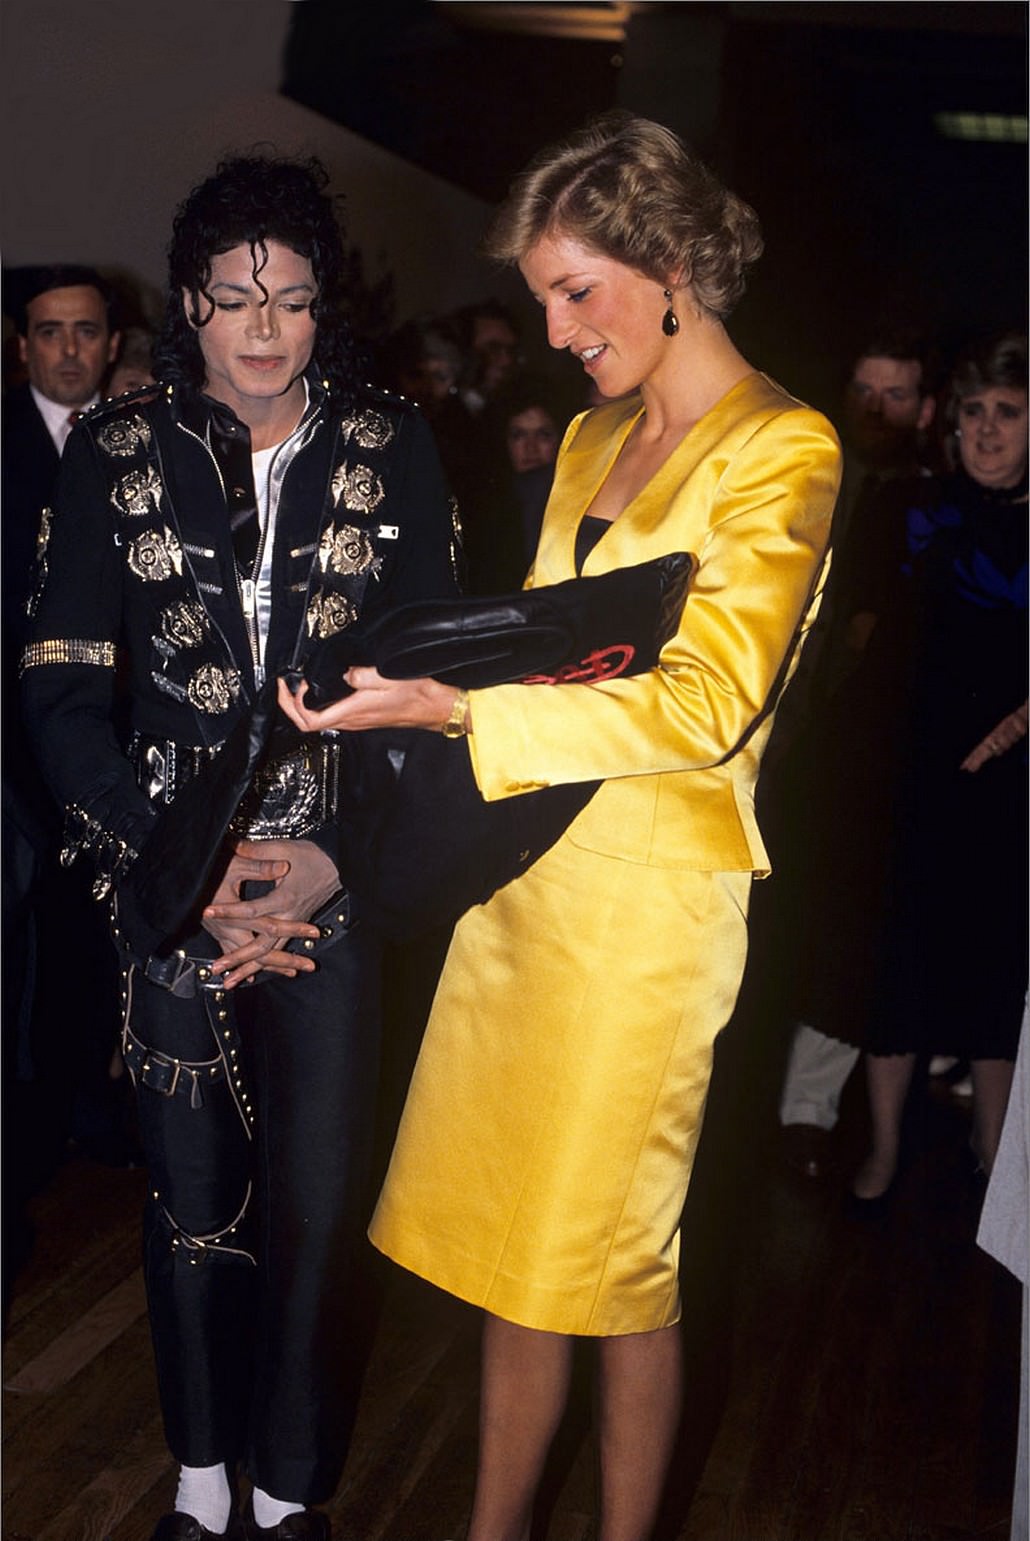 When Princess Diana met Michael Jackson in 1988, Lovely moments captured in Photos